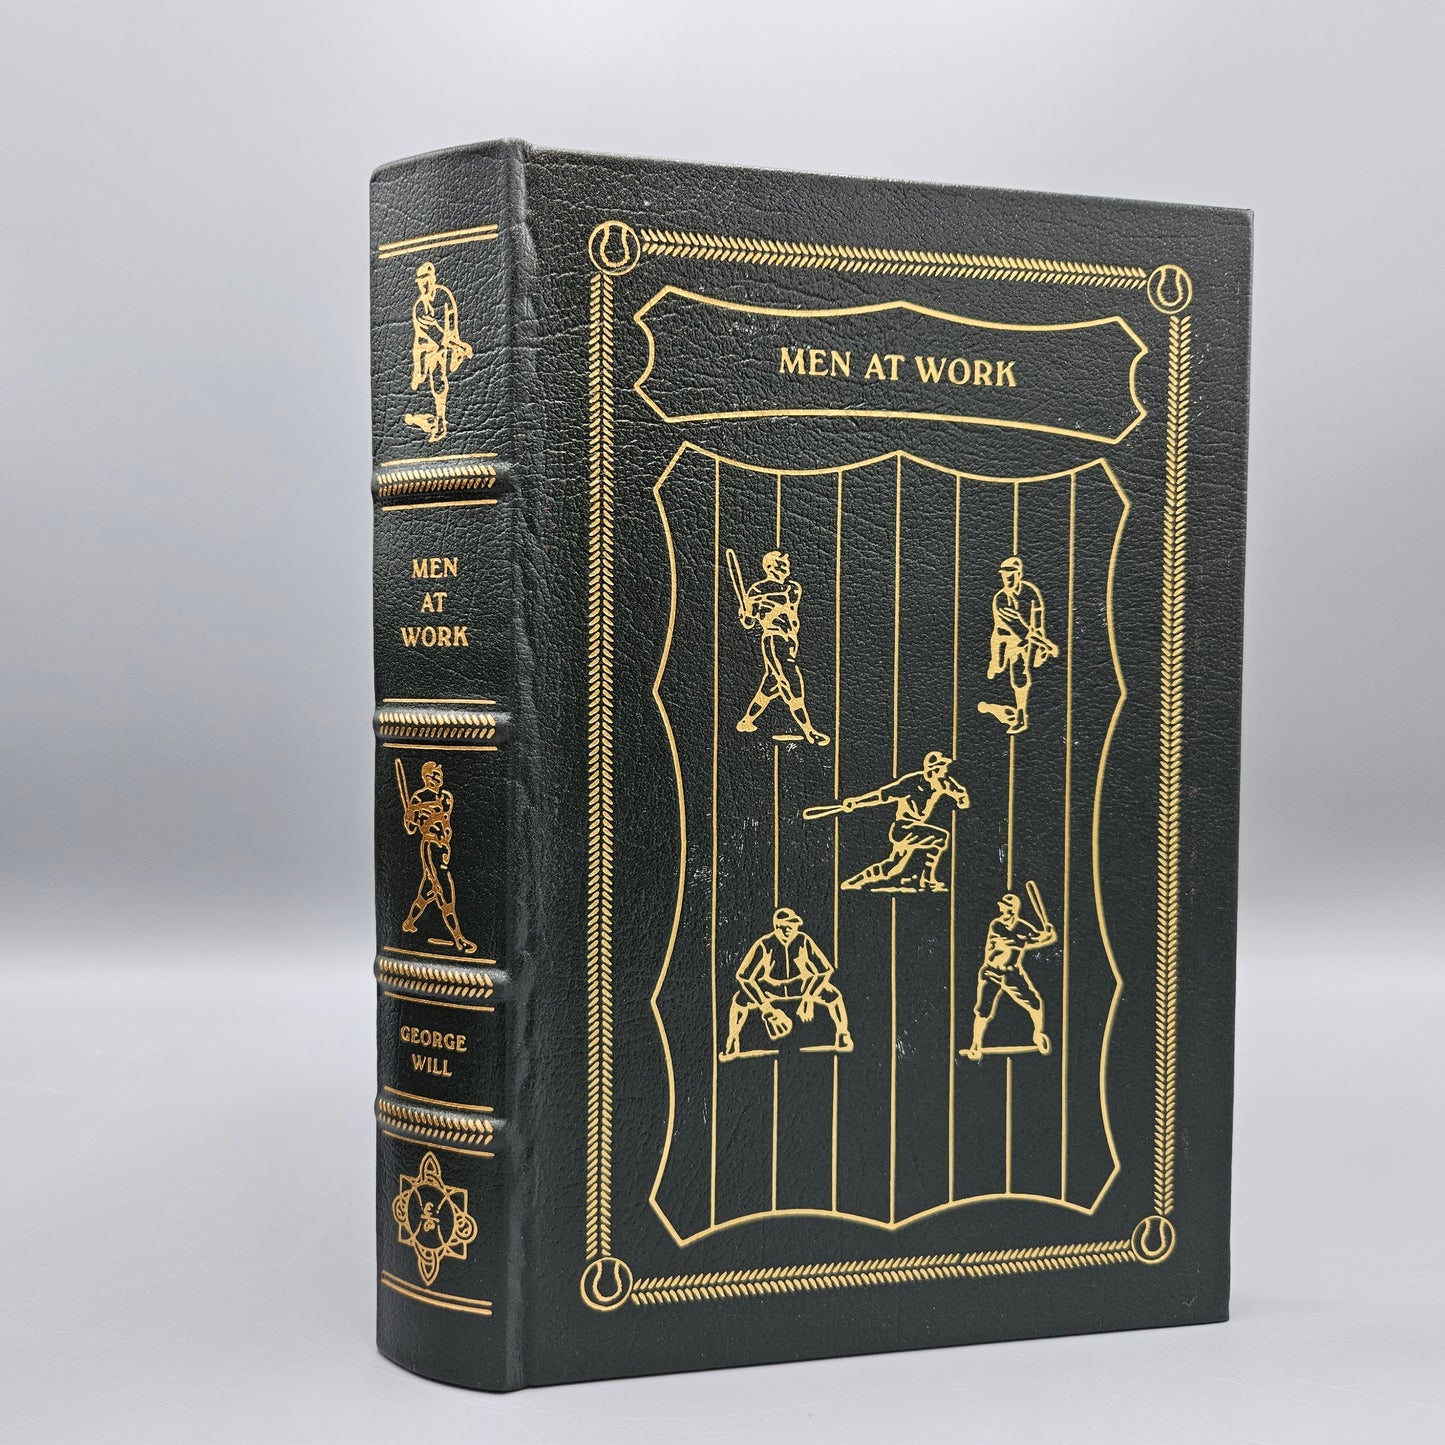 Leatherbound Book - George Will "Men at Work: The Craft of Baseball" Easton Press